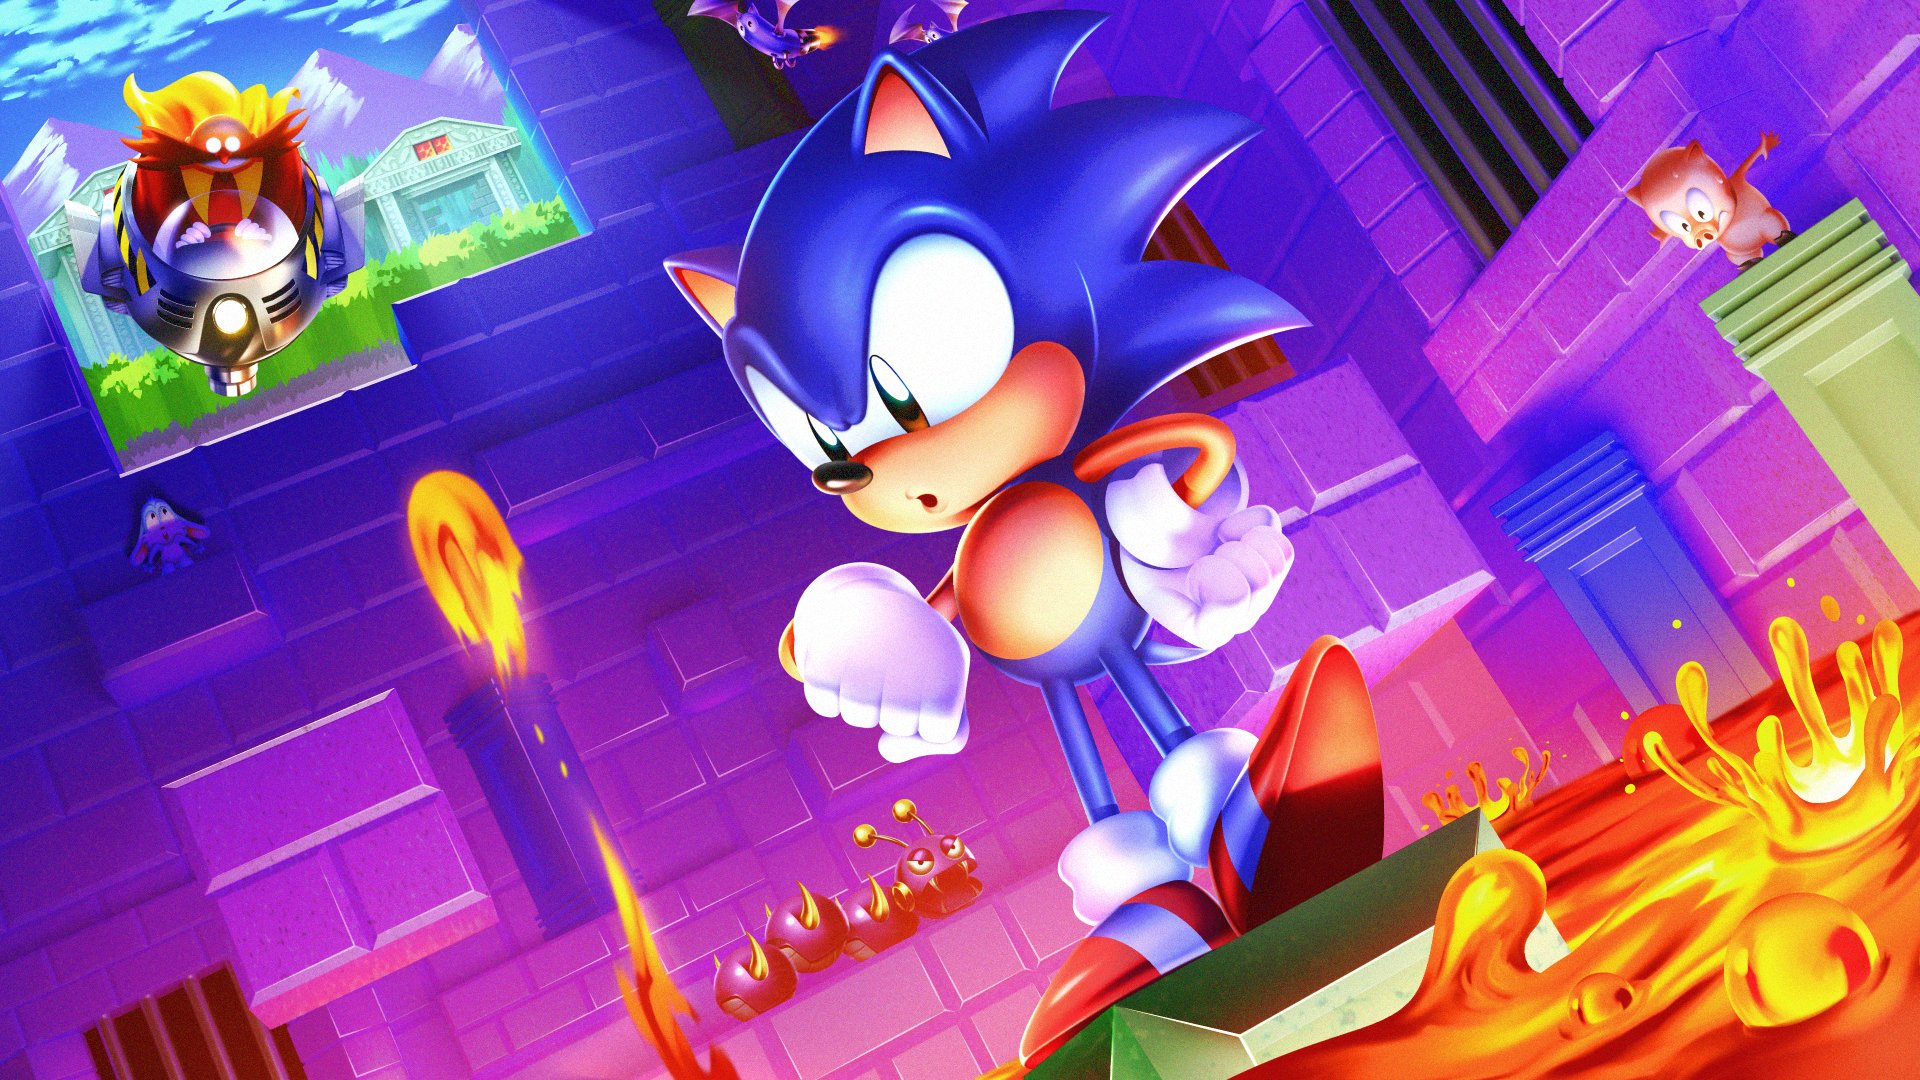 Sonic the Hedgehog's no time to wait keep moving forward!